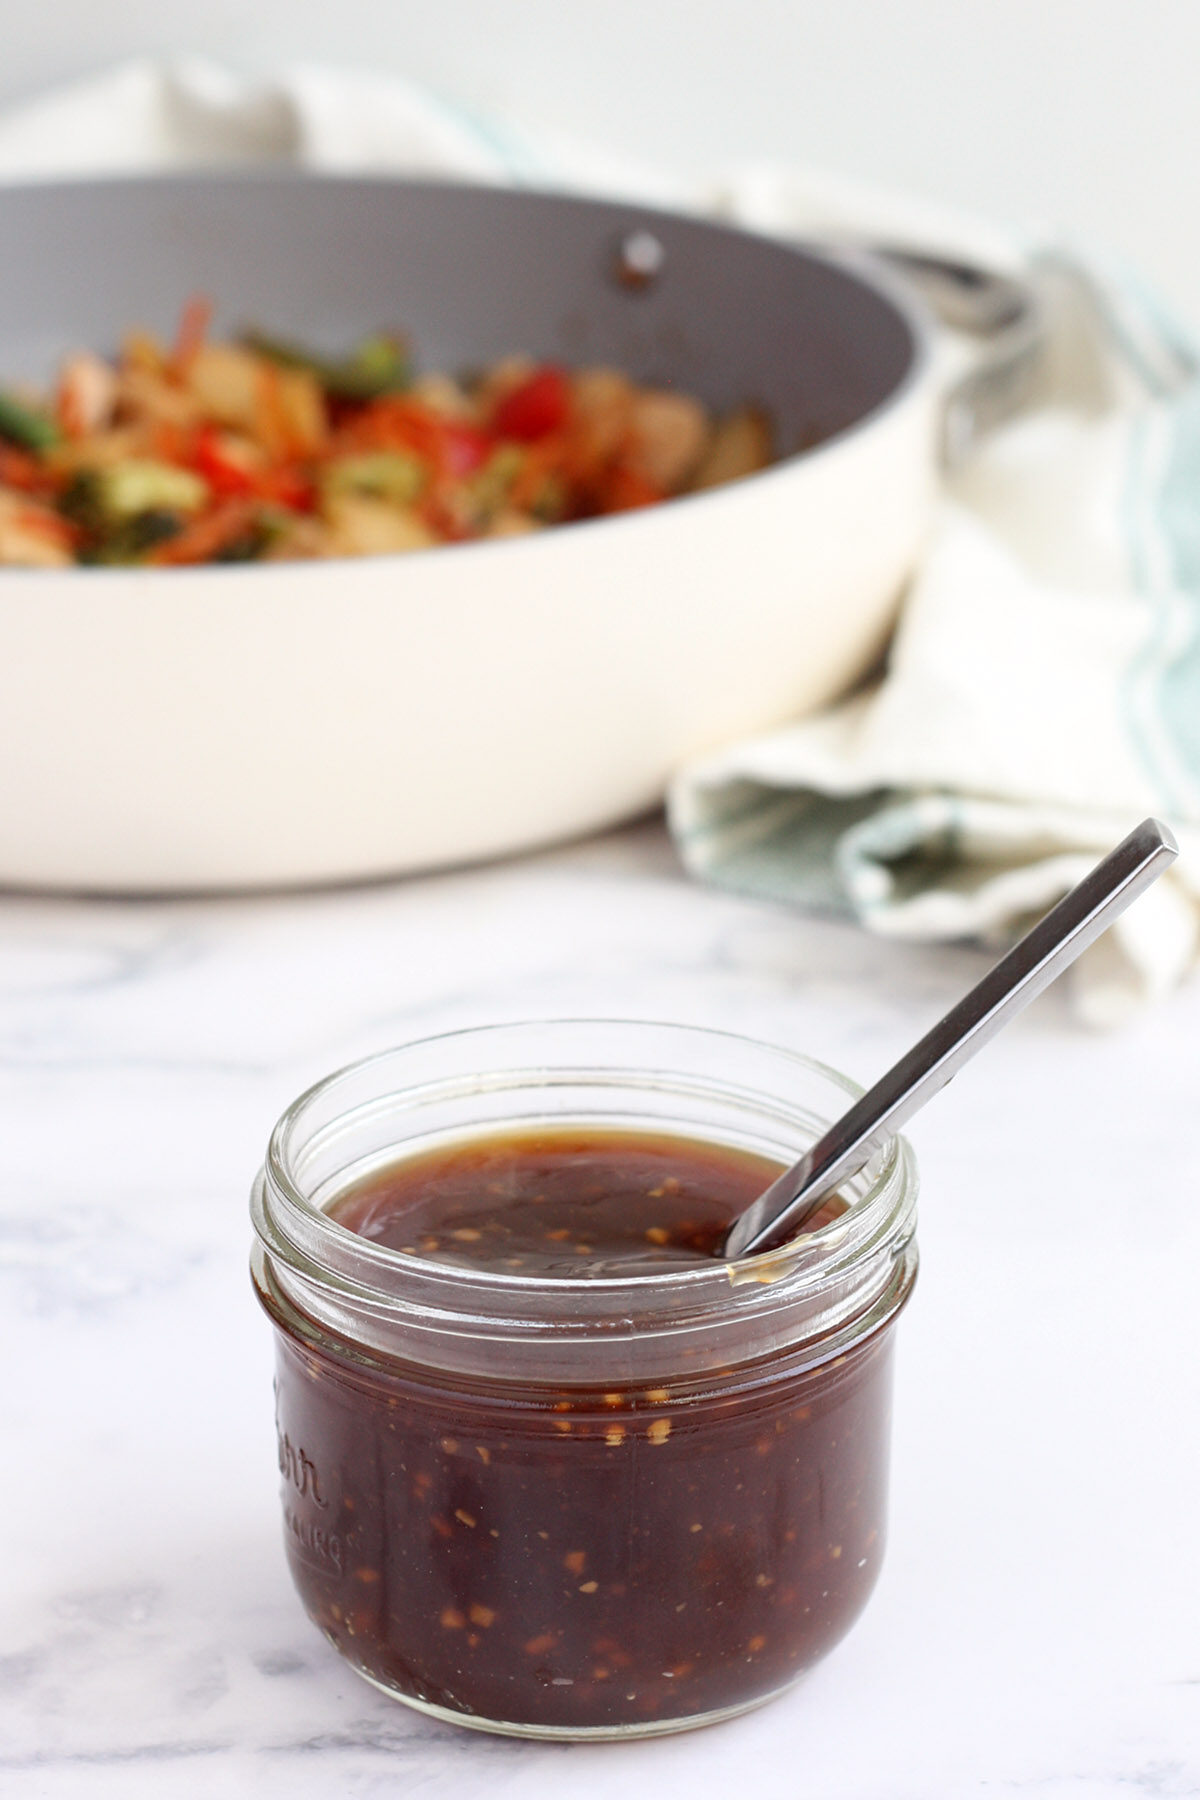 a jar of homemade stir-fry sauce with a spoon in front of the stir-fry pan